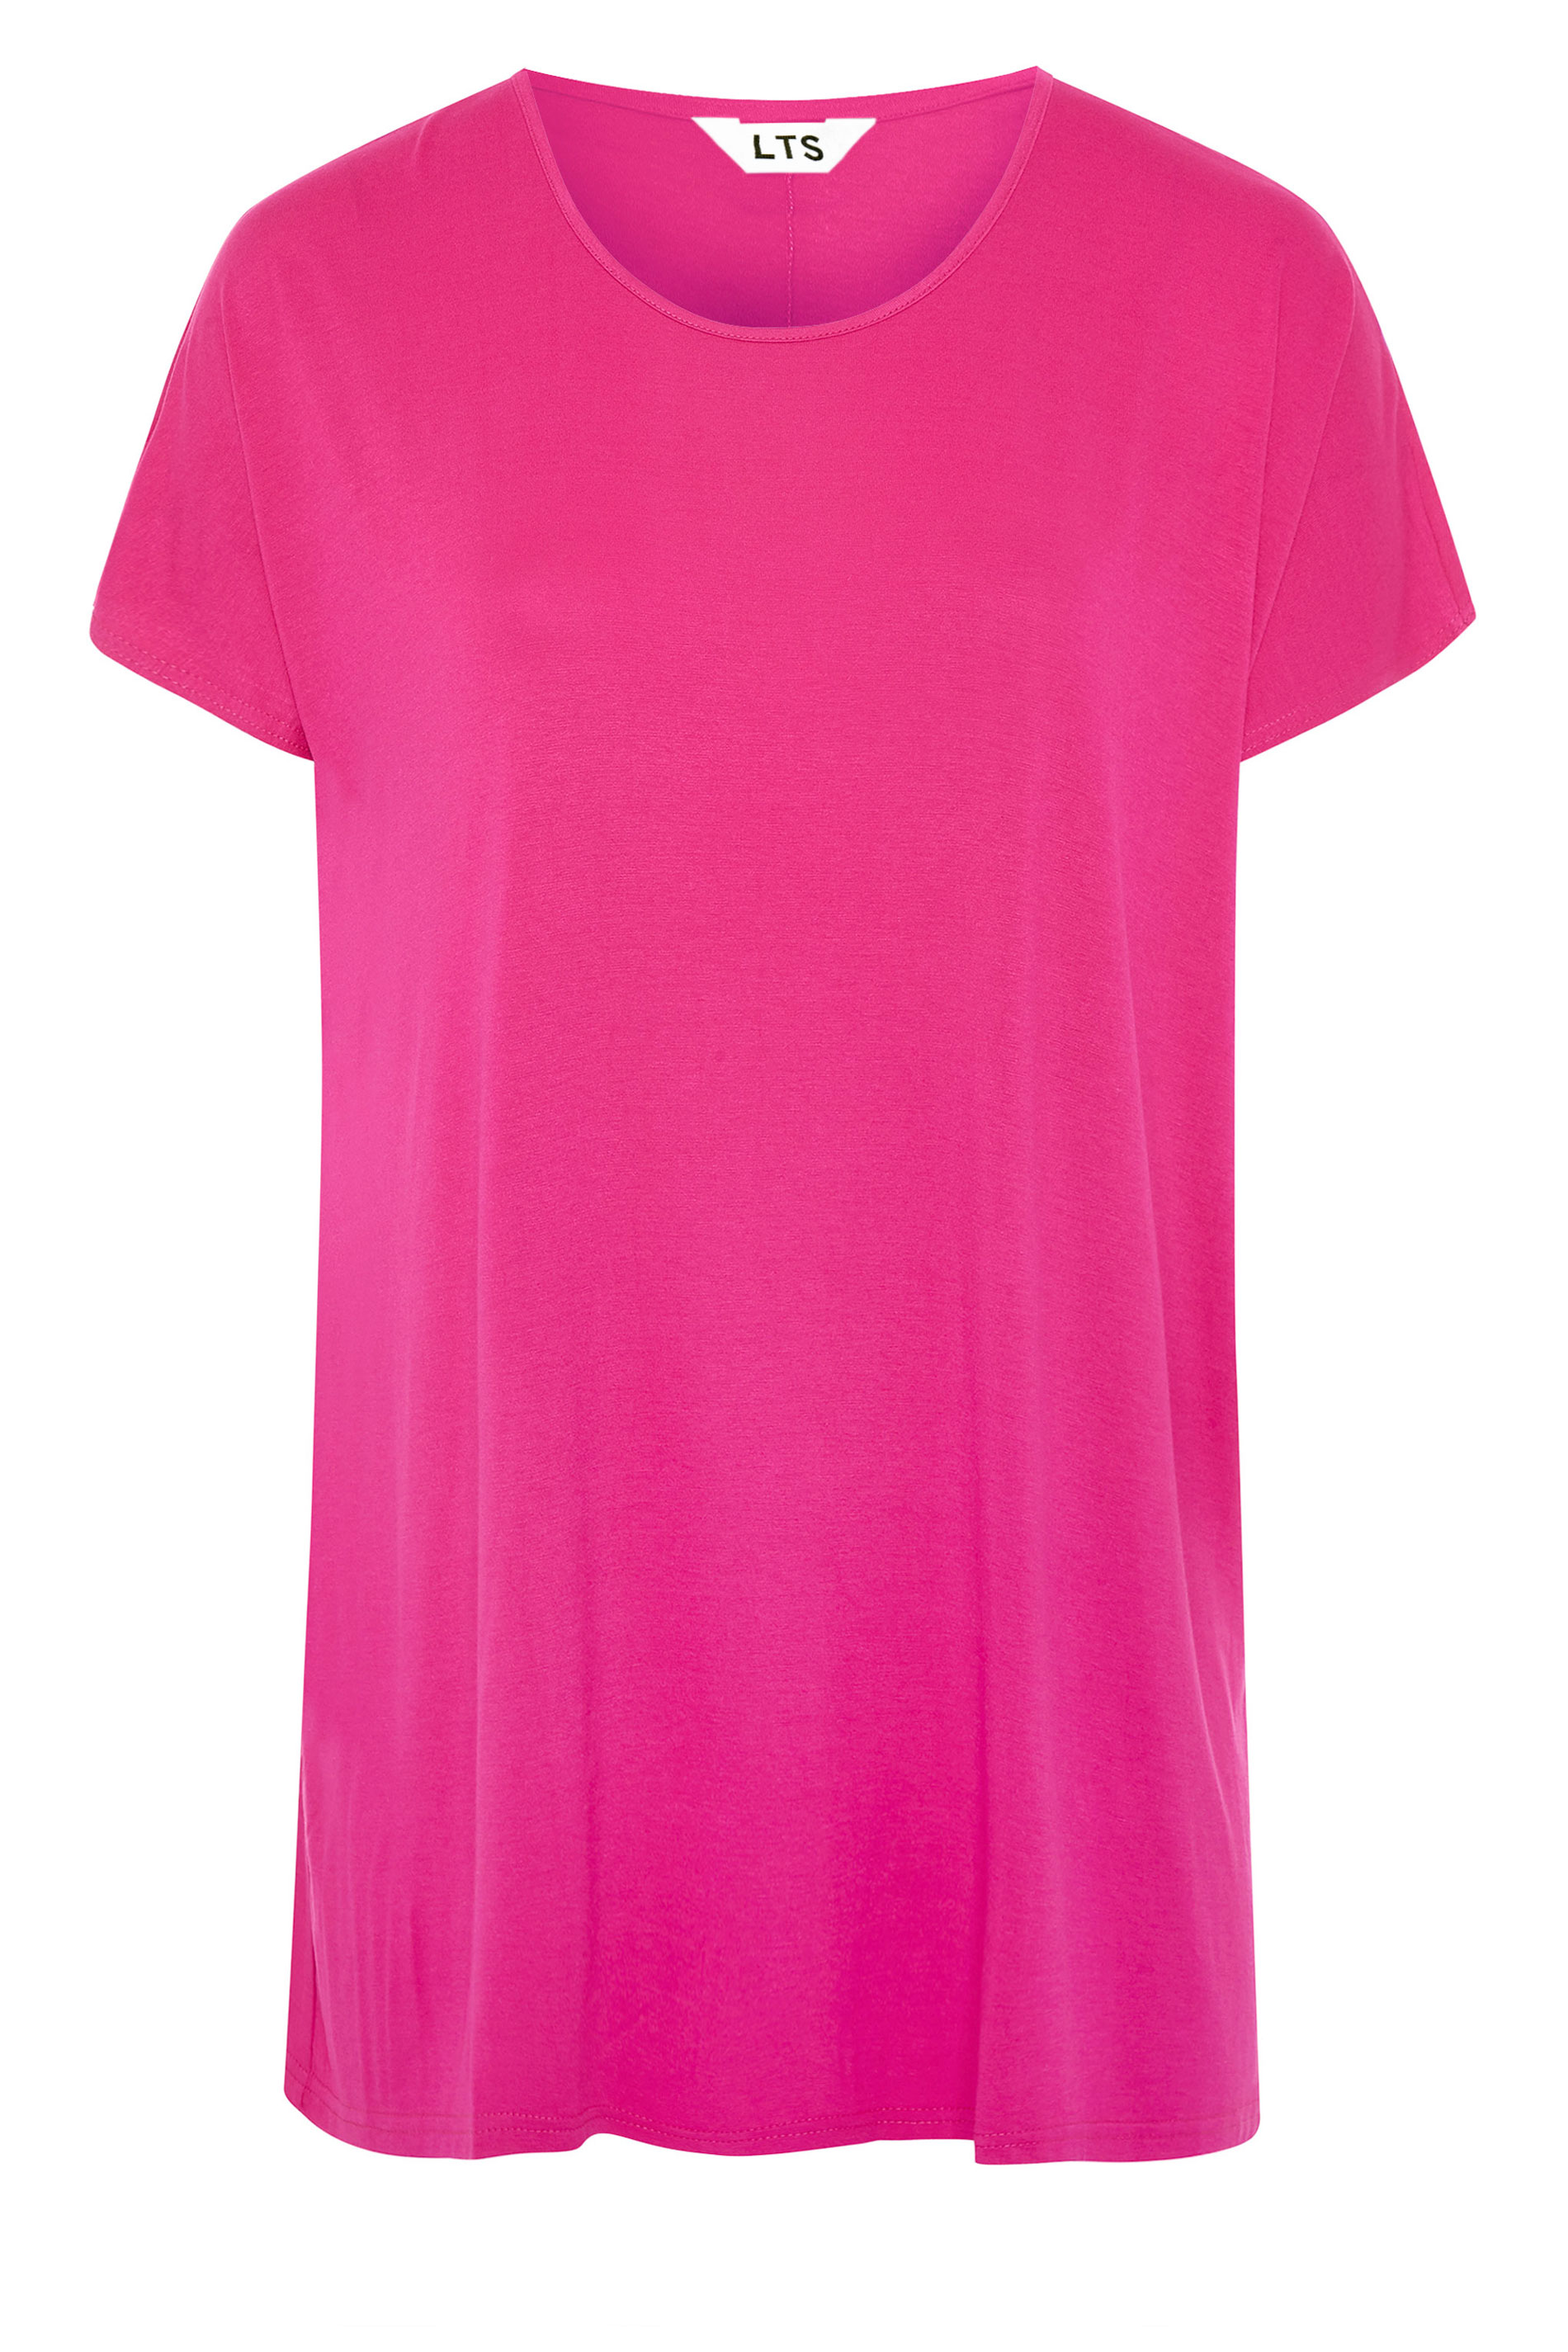 LTS Pink Soft Touch Grown On Sleeve T-Shirt | Long Tall Sally